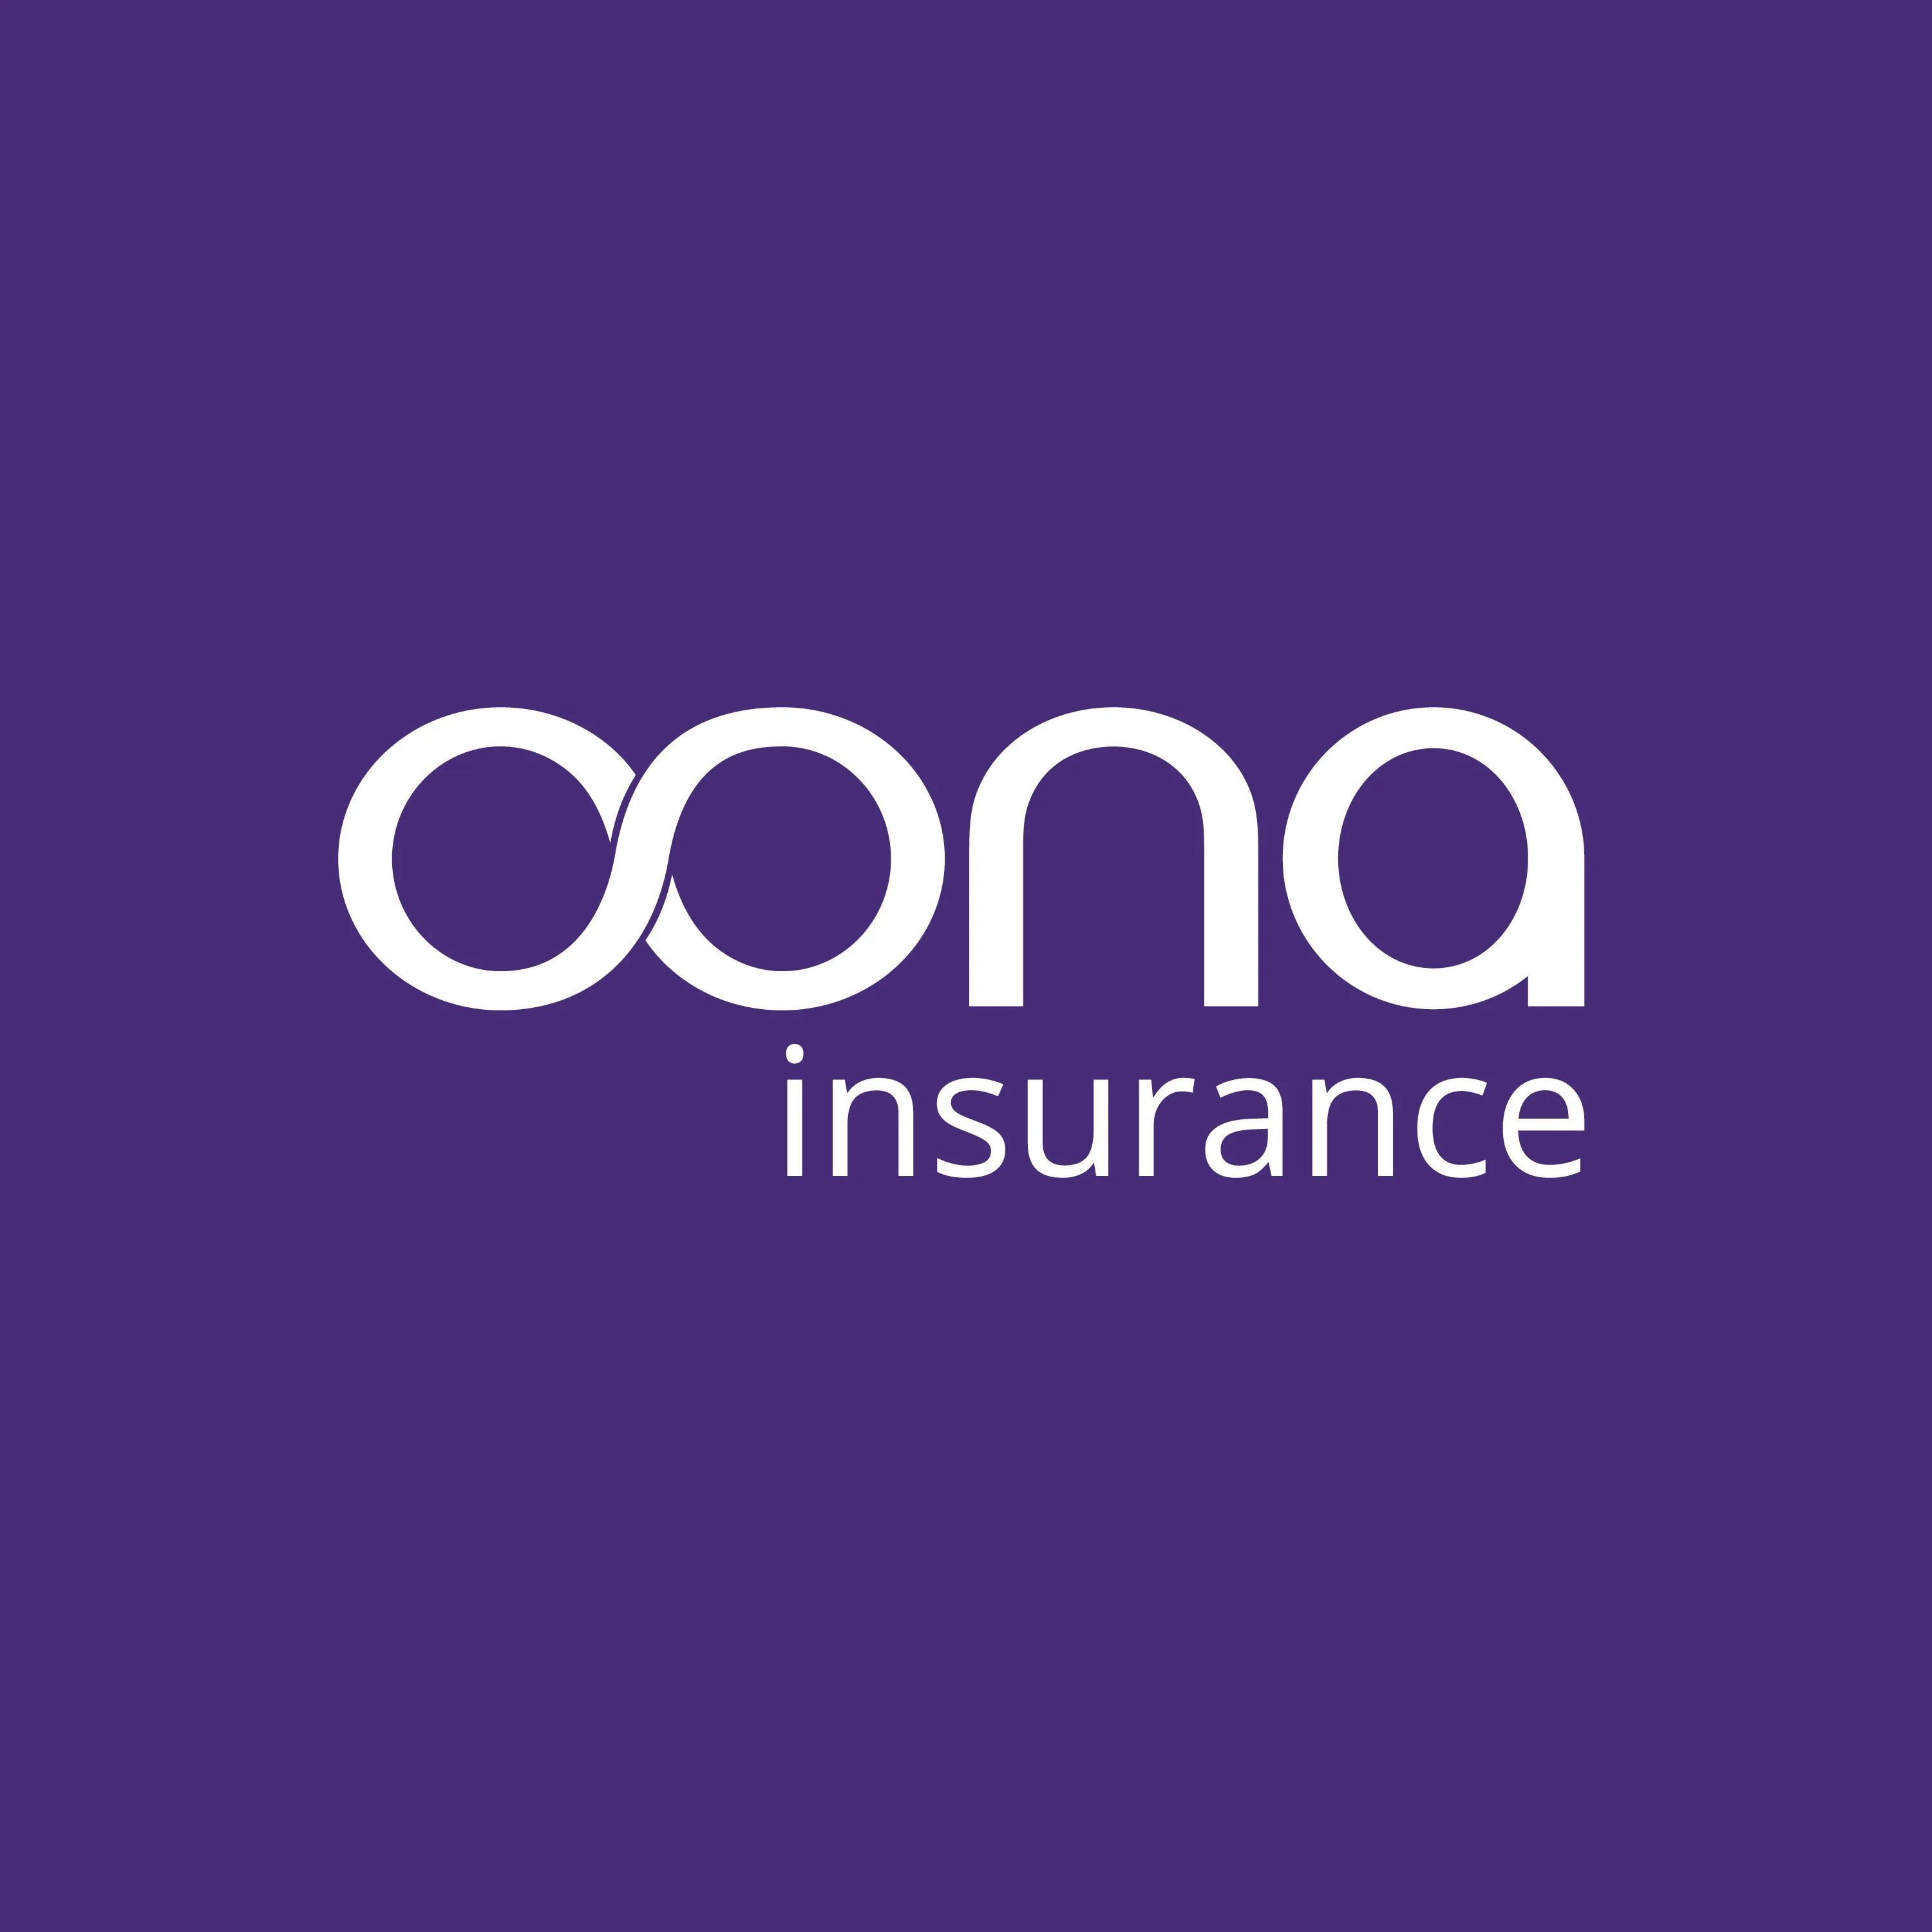 mapfre-insurance-now-officially-oona-insurance